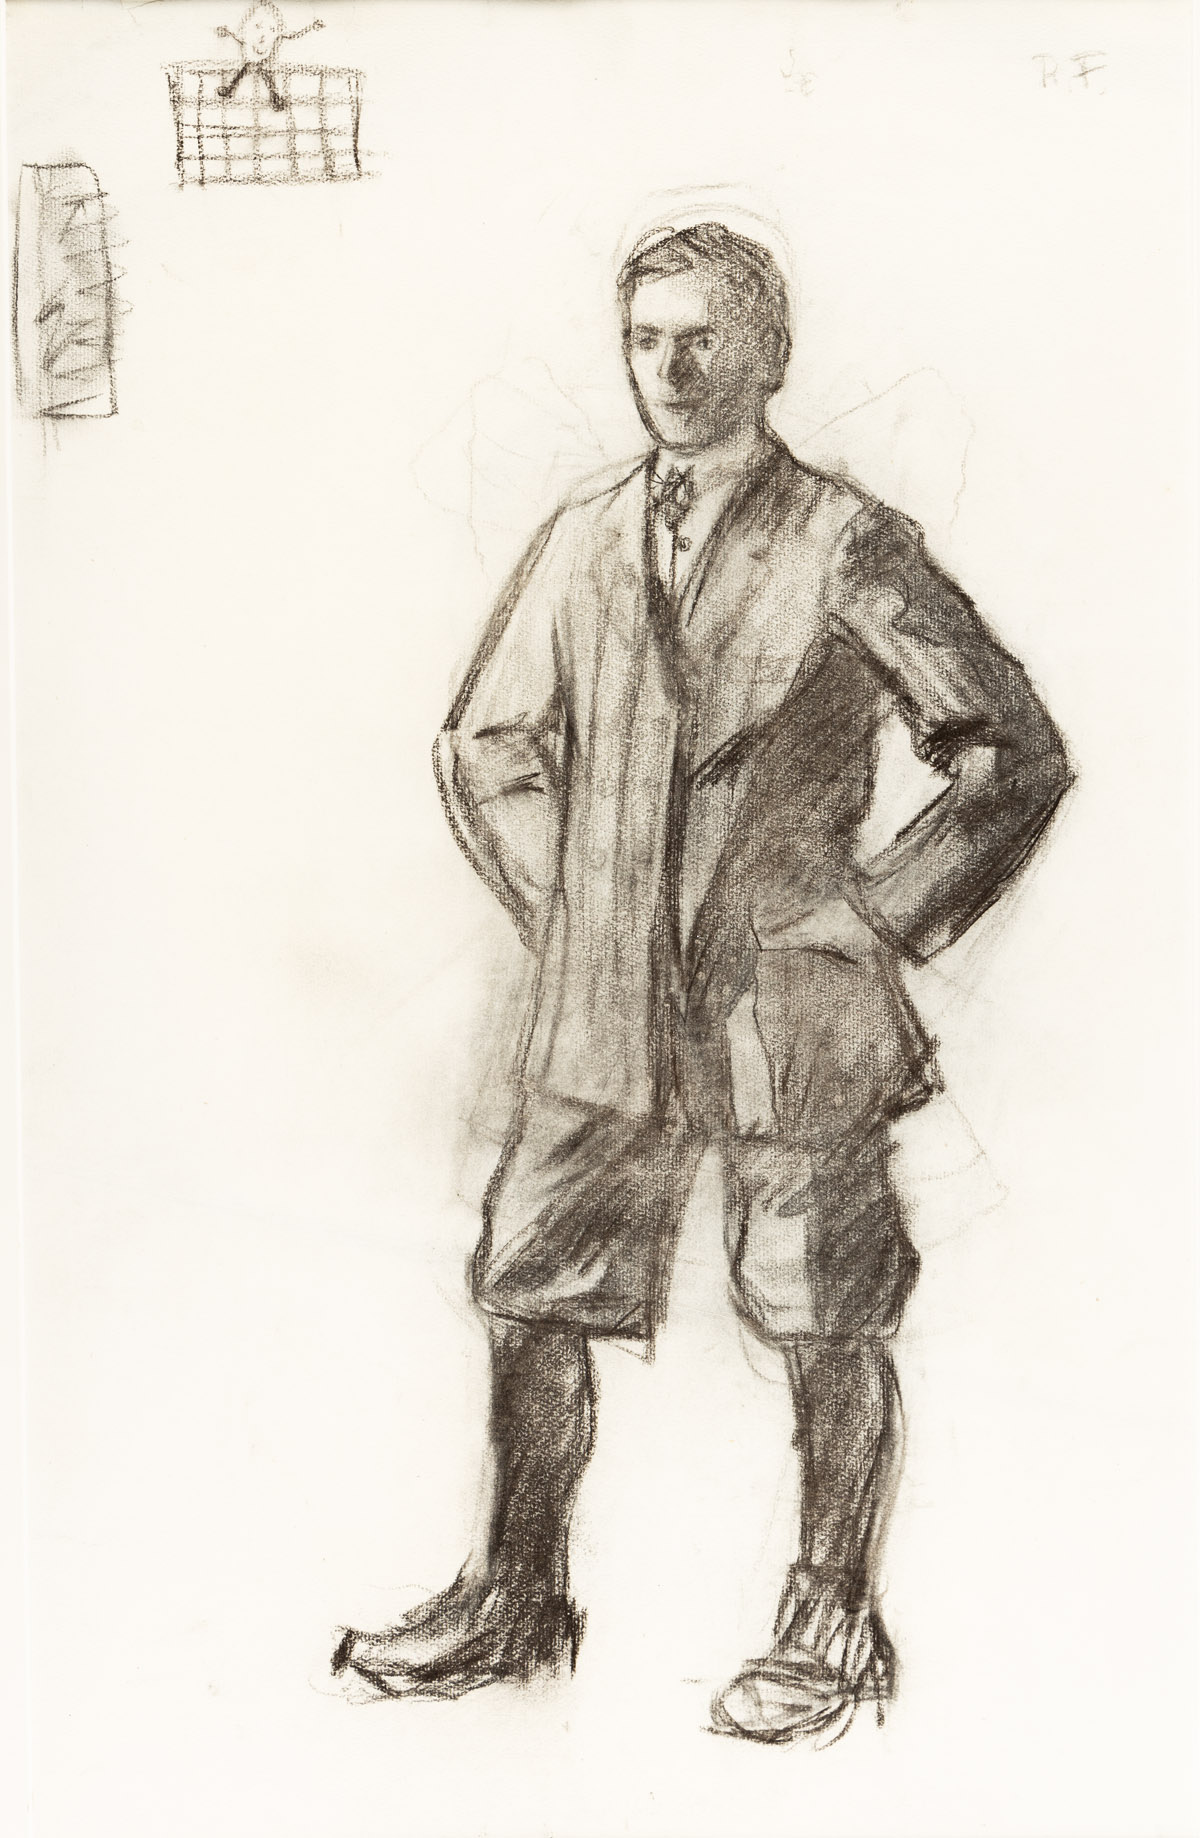 EDWARD HOPPER Full-Length Portrait of a Man in Jacket and Knickers.